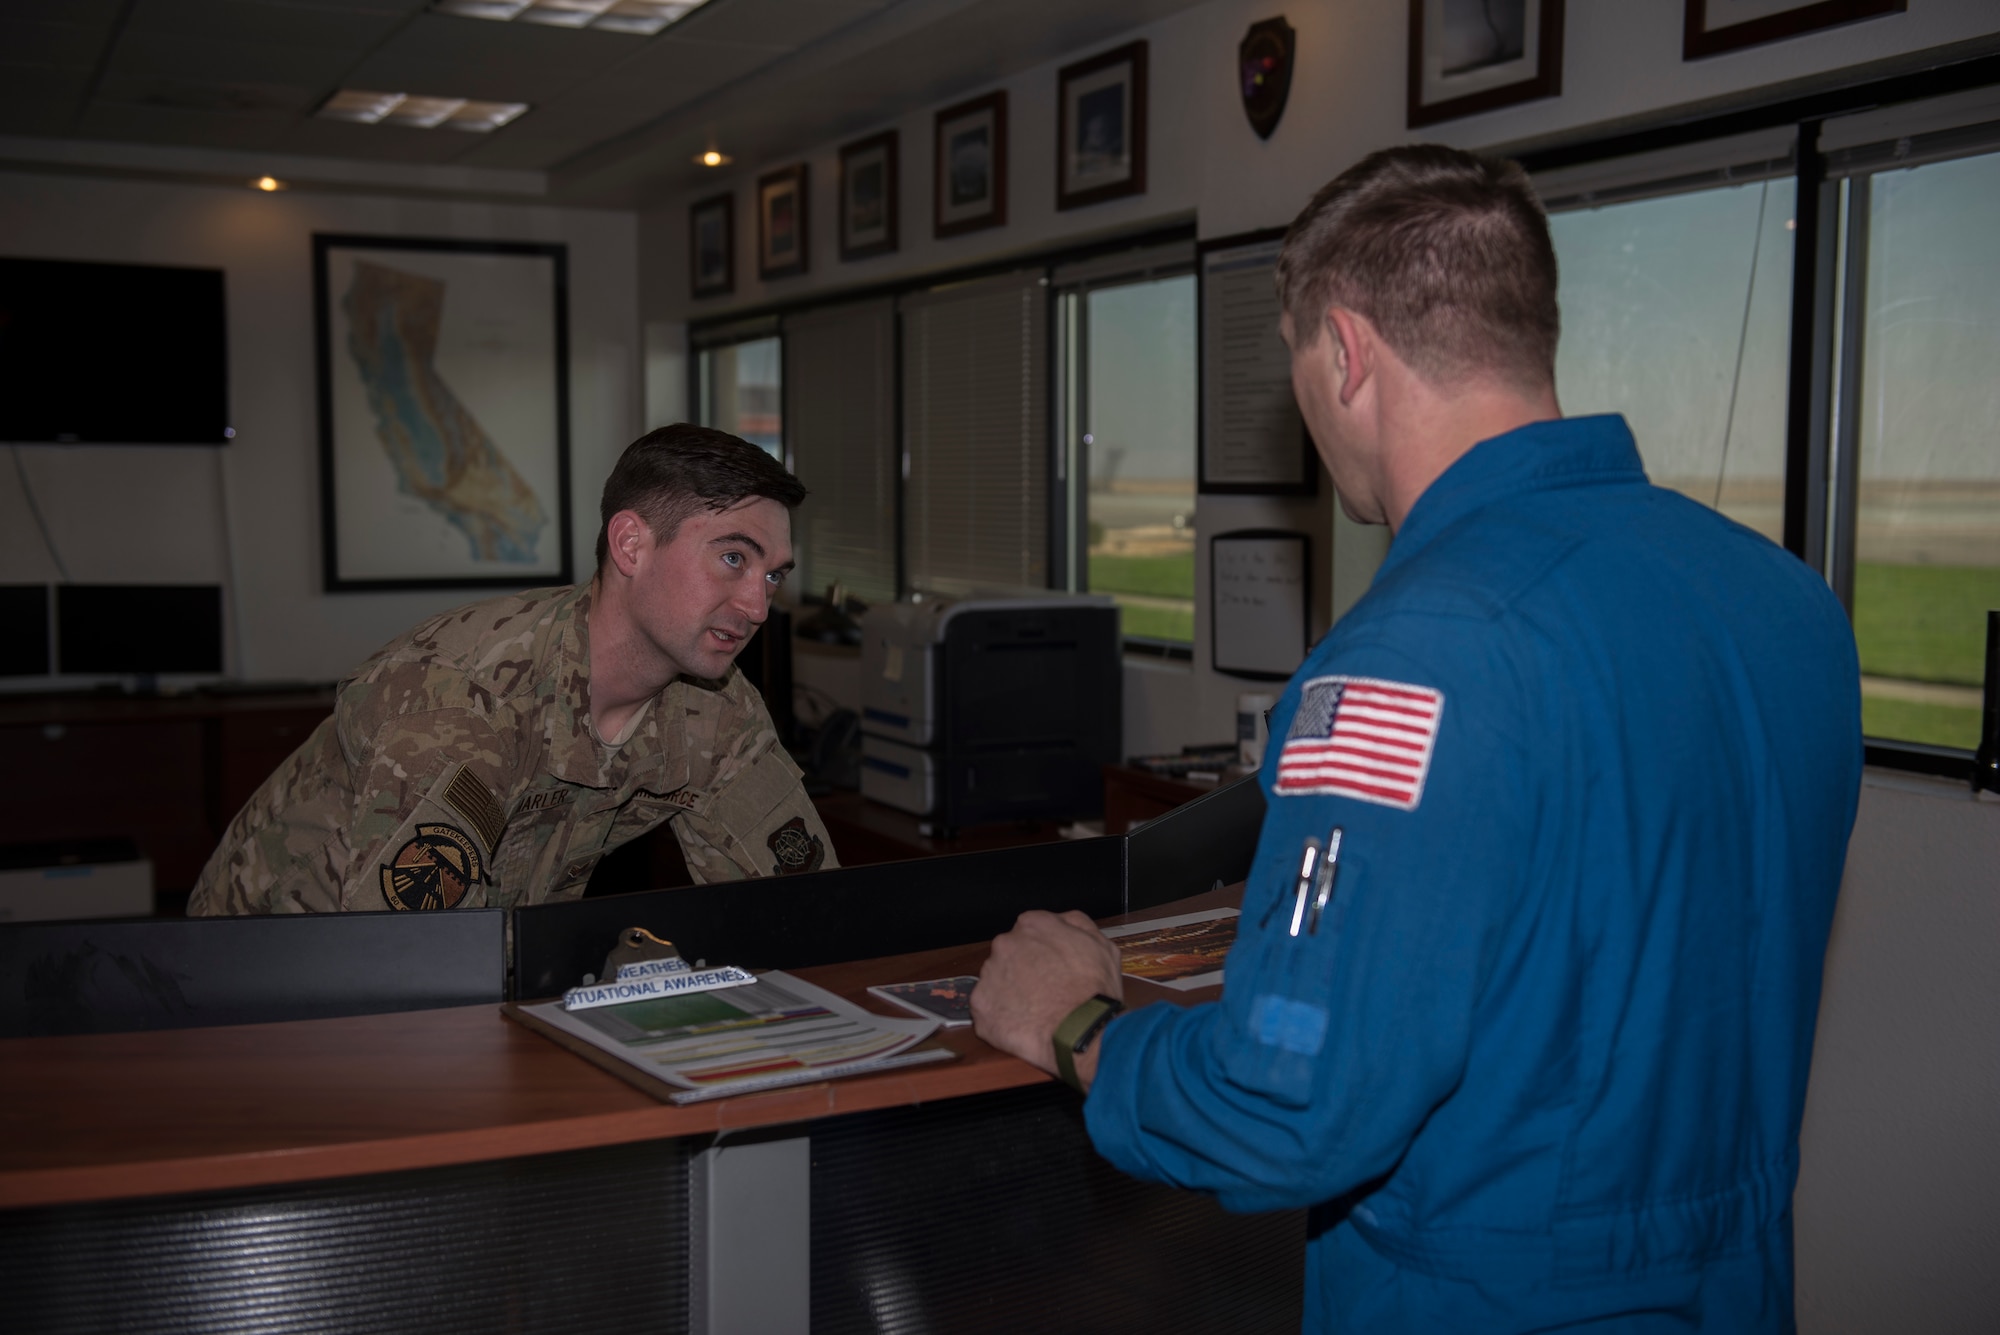 U.S. Air Force Senior Airman Dylan Marler, 60th Operation Support Squadron weather forecaster, speaks with Donald Darrow, NASA special equipment operator Nov. 18, 2019, at Travis Air Force Base California. Marler informs NASA personnel about the local weather so they know if they can proceed with their work. (U.S. Air Force photo by Airman 1st Class Cameron Otte)